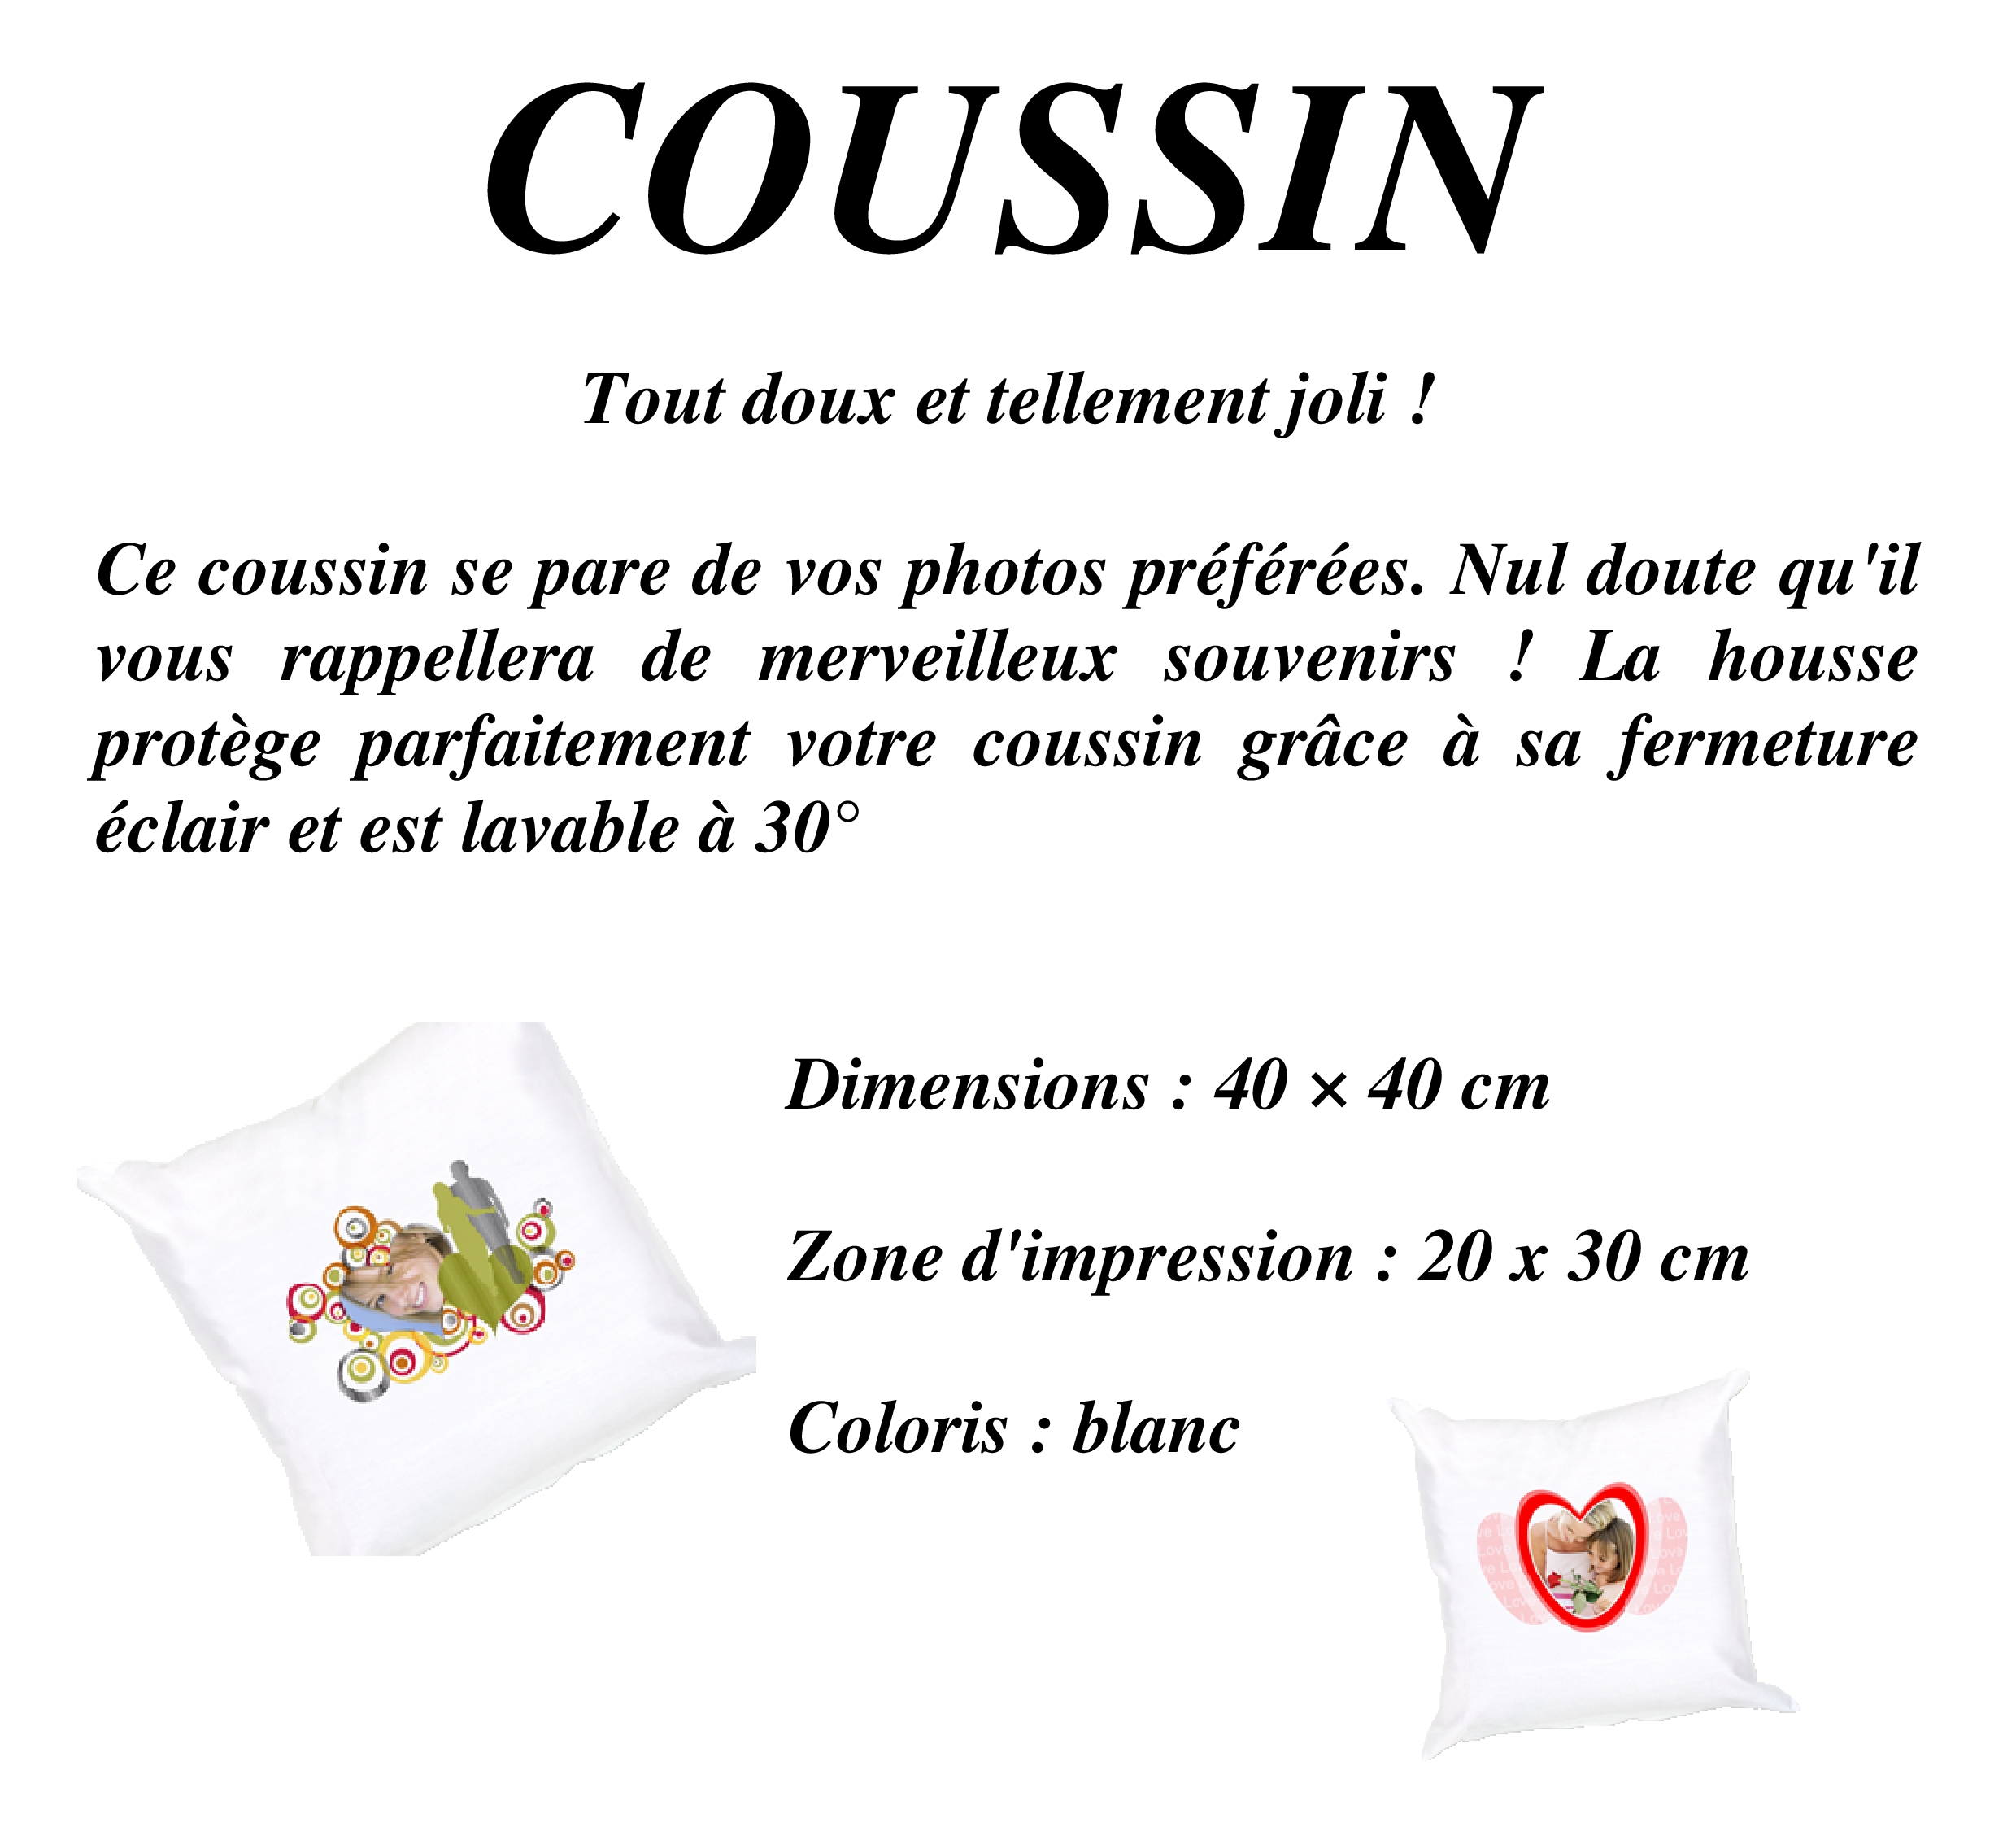 04 Coussin 02